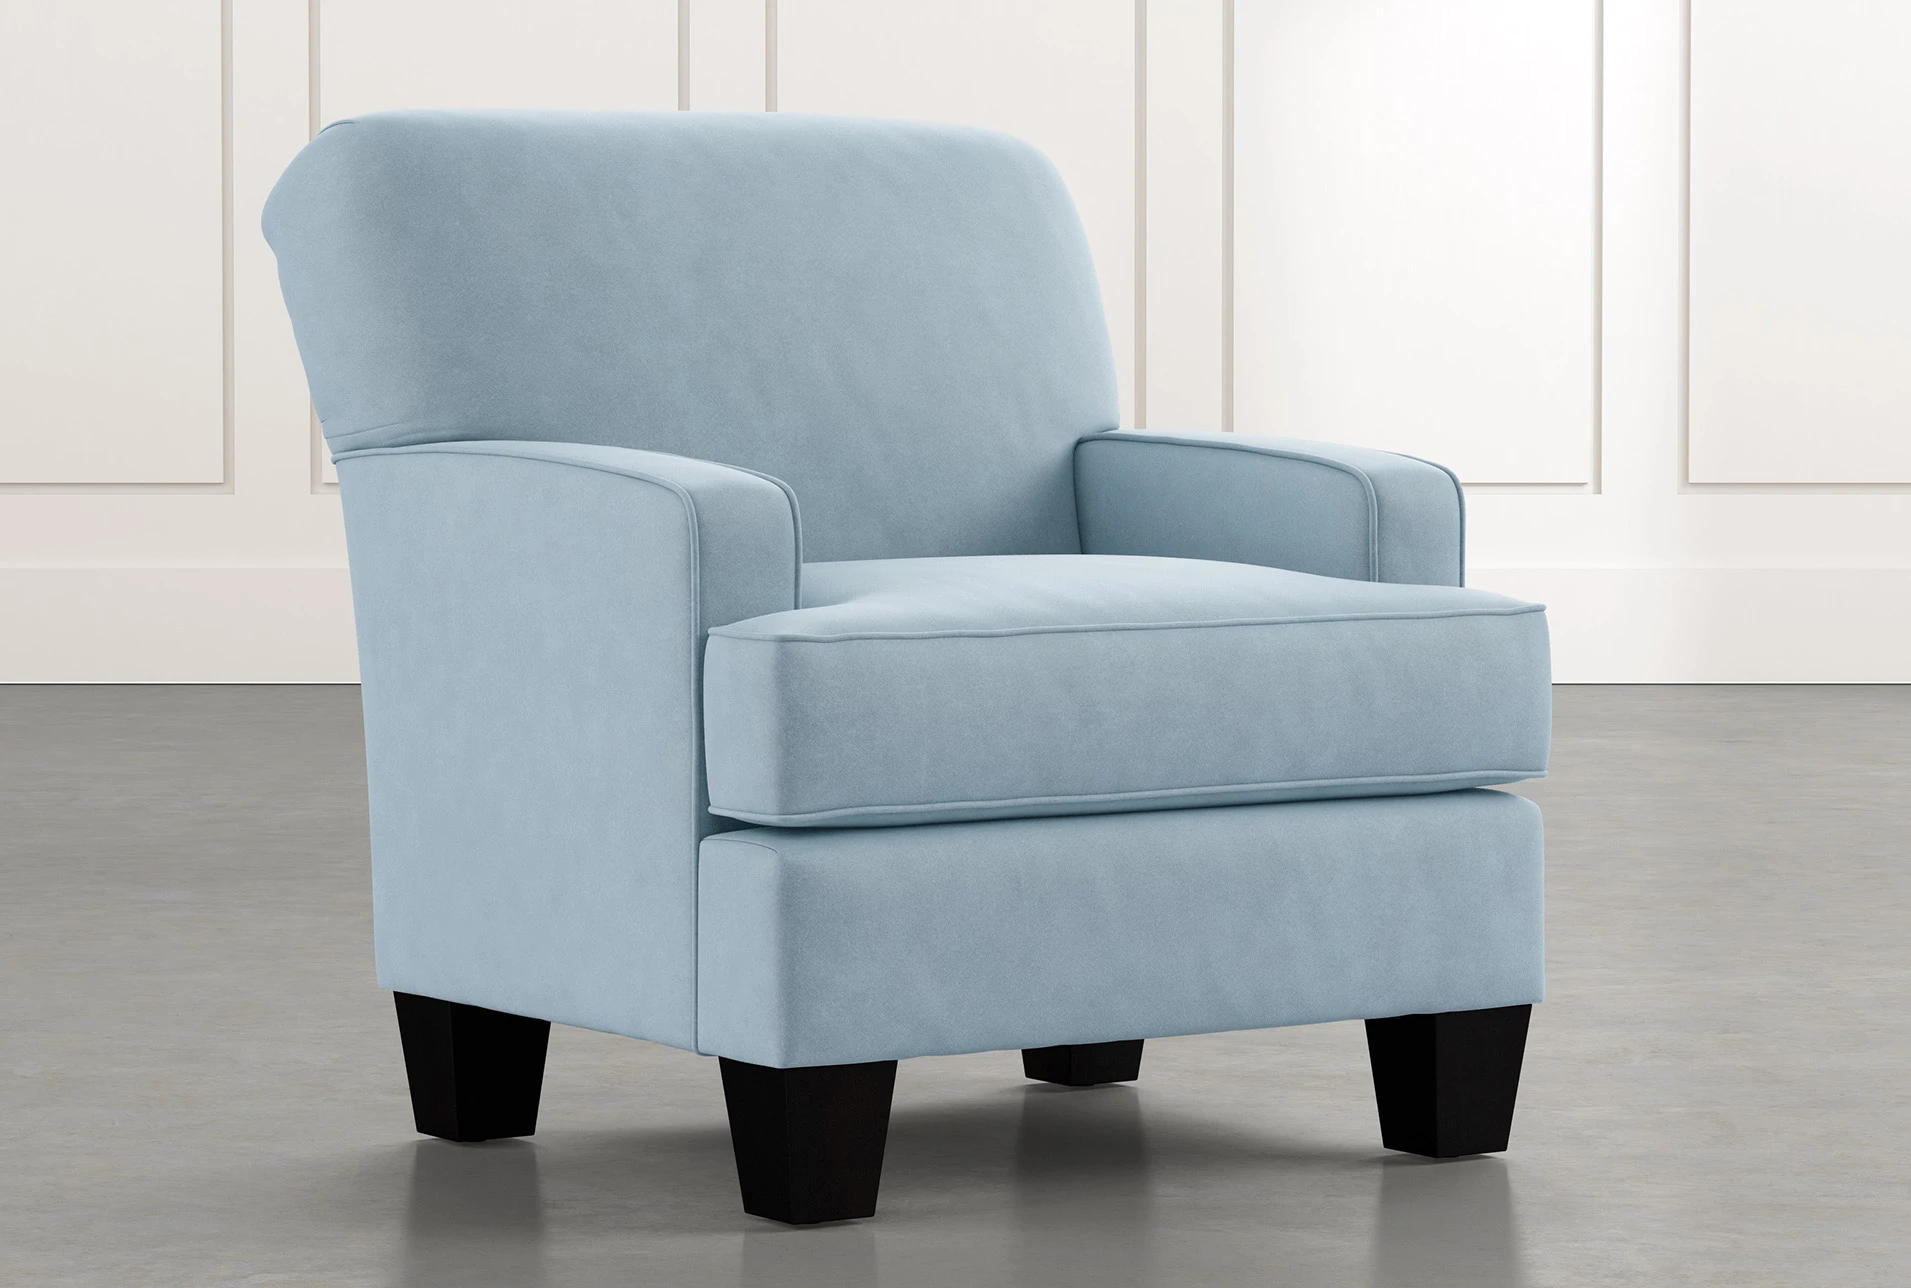 Blue Acccent Chair In Living Room